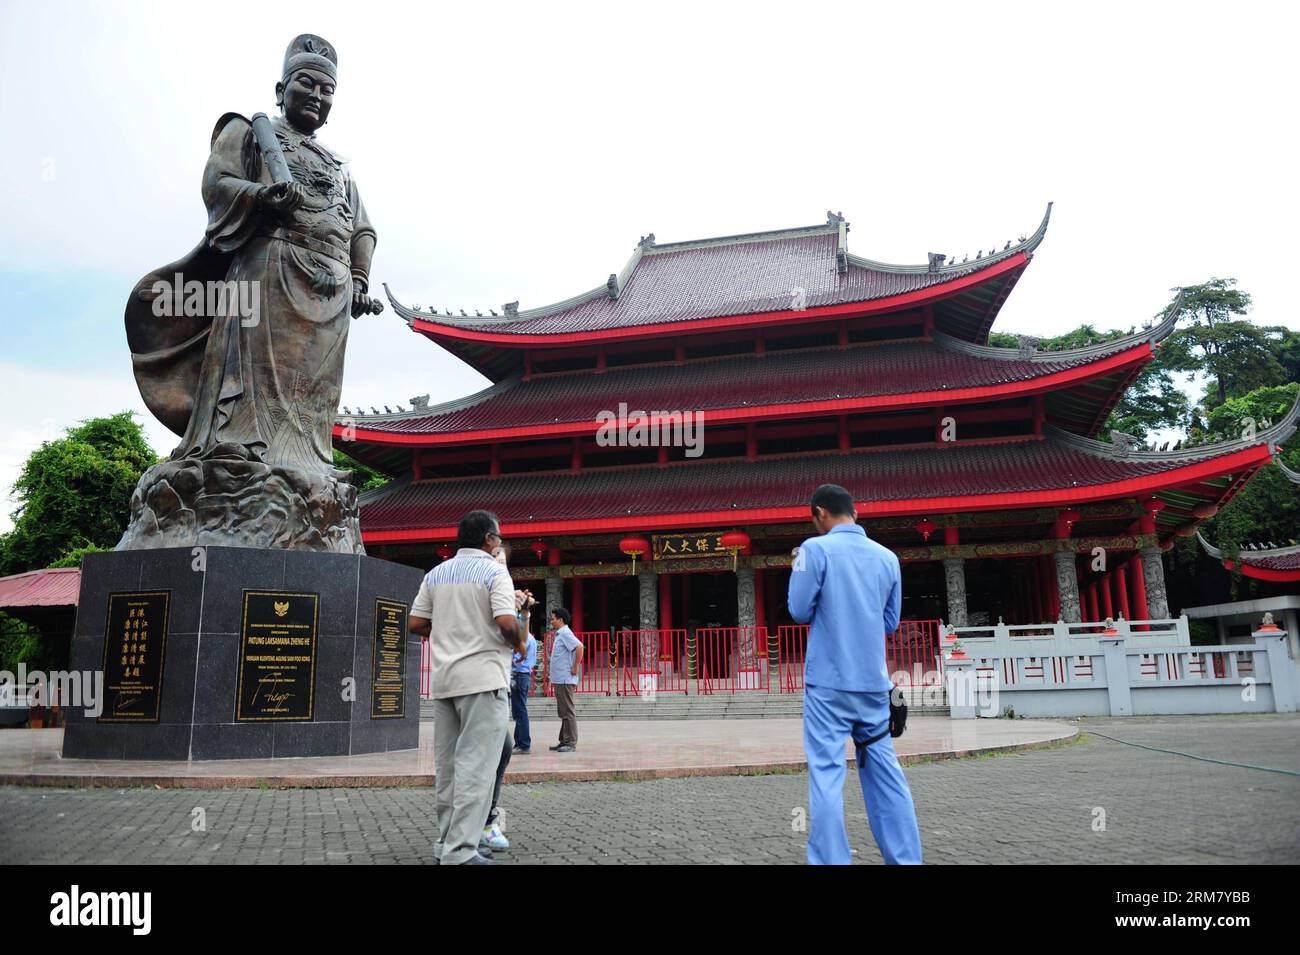 (140320) -- SEMARANG, March 20, 2014 (Xinhua) -- Tourist stand beside the statue of Chinese navy explorer Zheng He in front of the Sam Poo Kong Temple, in Semarang, Central Java, Indonesia, March 20, 2014. Chinese navy explorer Zheng He who visited the Central Java Province s port city of Semarang 600 years ago, built a mosque and set up a Chinese Muslim community in the city. The mosque was later turned into a temple by Semarang residents, now known as Sam Poo Kong with a huge Zheng He statue in its front. (Xinhua/Zulkarnain) (djj) INDONESIA-CENTRAL JAVA-SAM POO KONG TEMPLE PUBLICATIONxNOTxIN Stock Photo